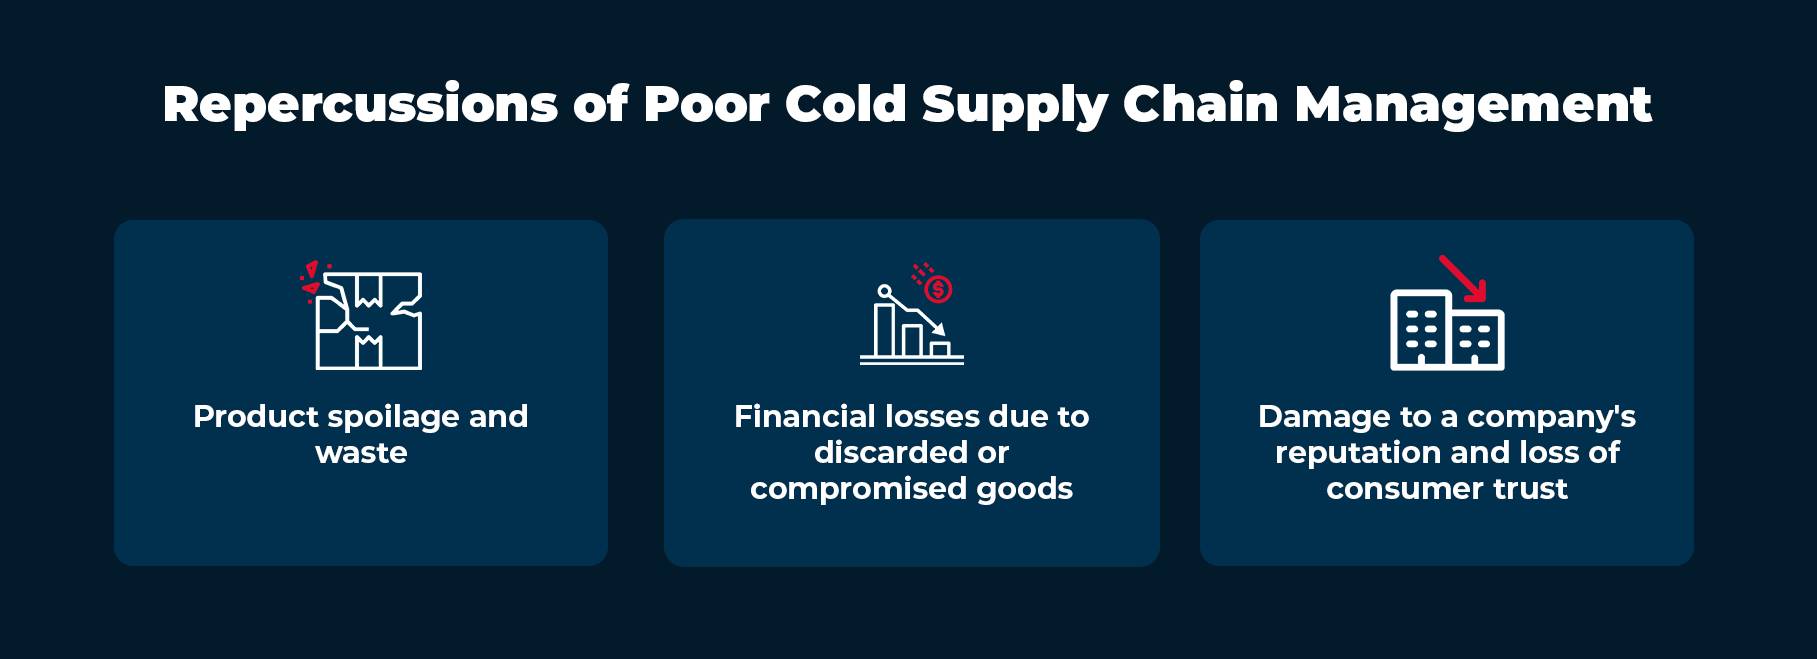 Repercussions of Poor Cold Supply Chain Management